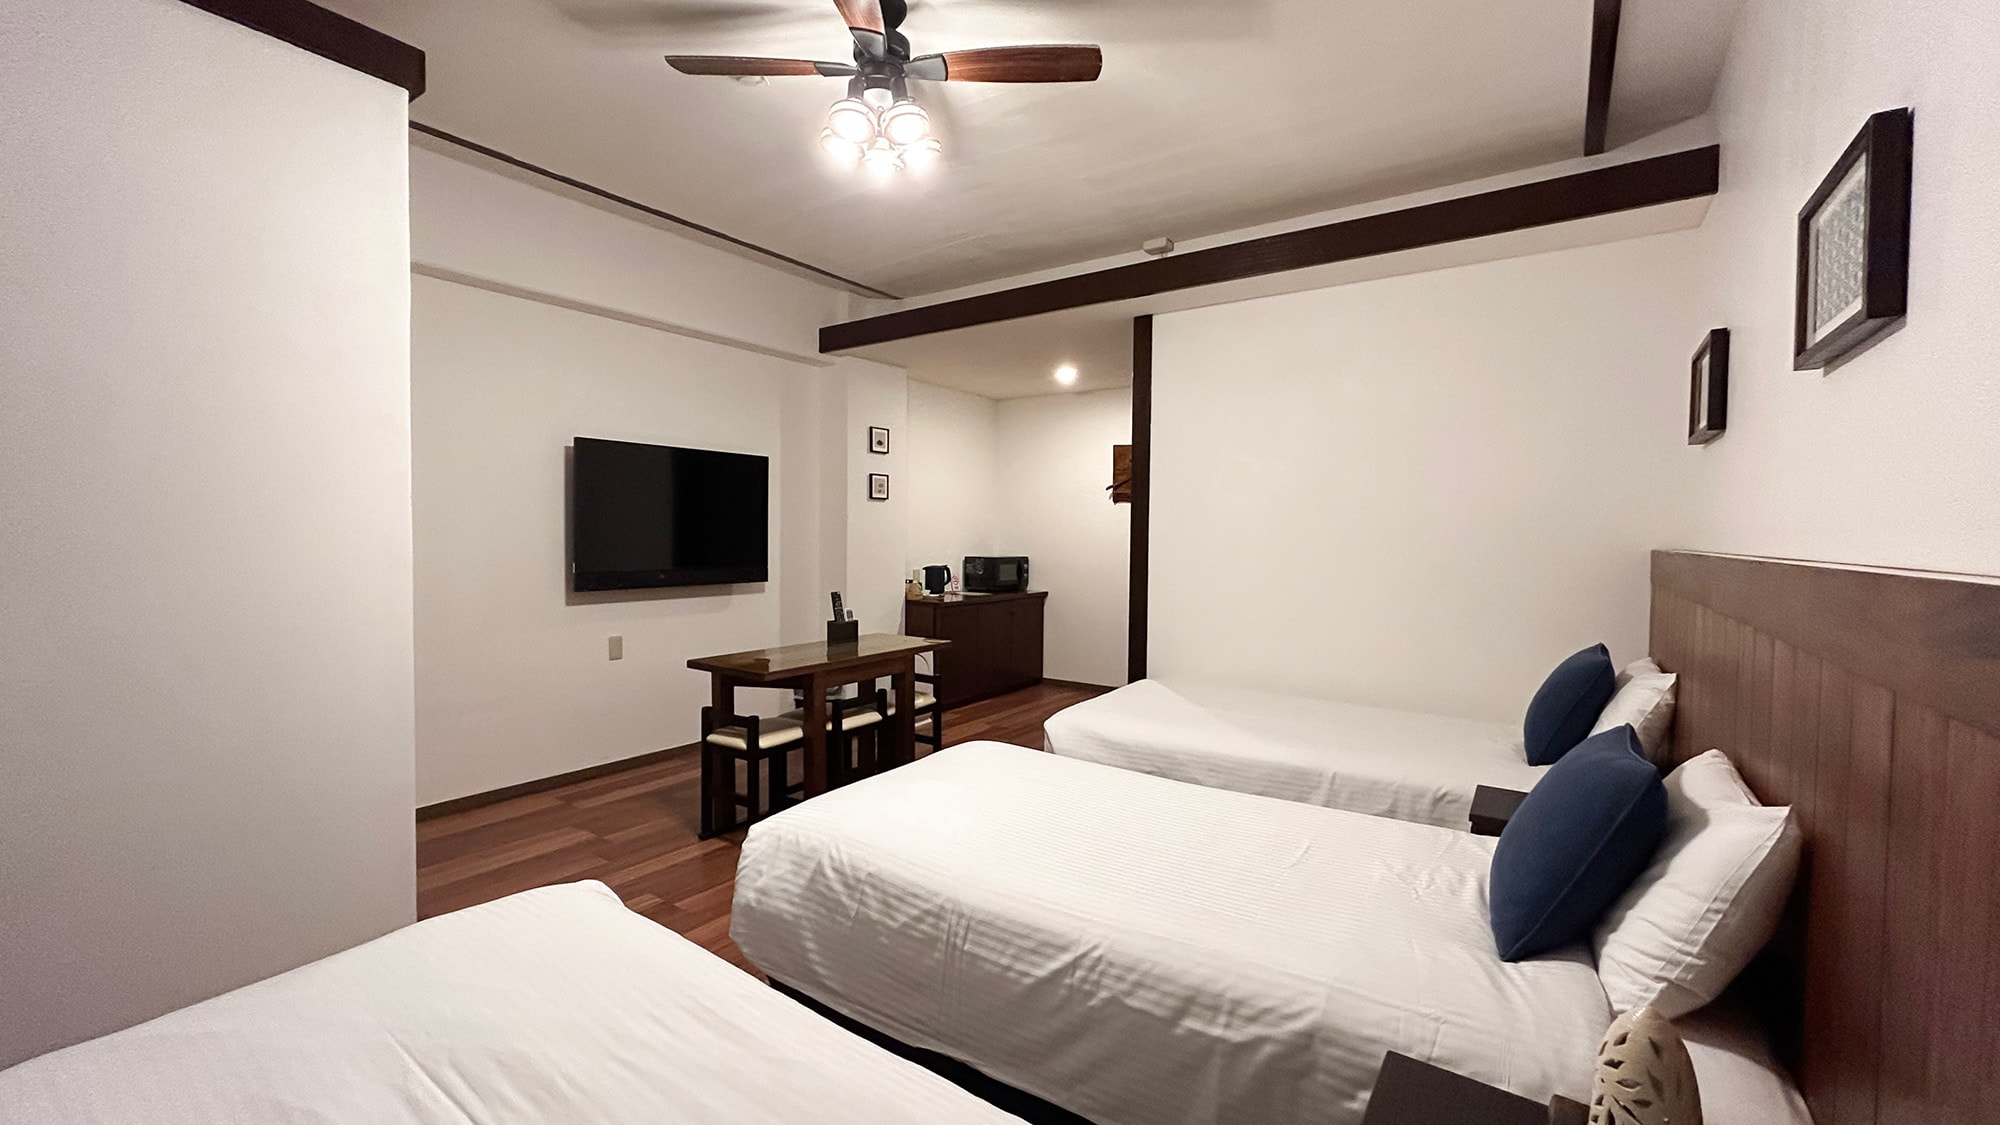 ・[Triple Room] A room that can accommodate up to 3 people. Recommended for families and groups